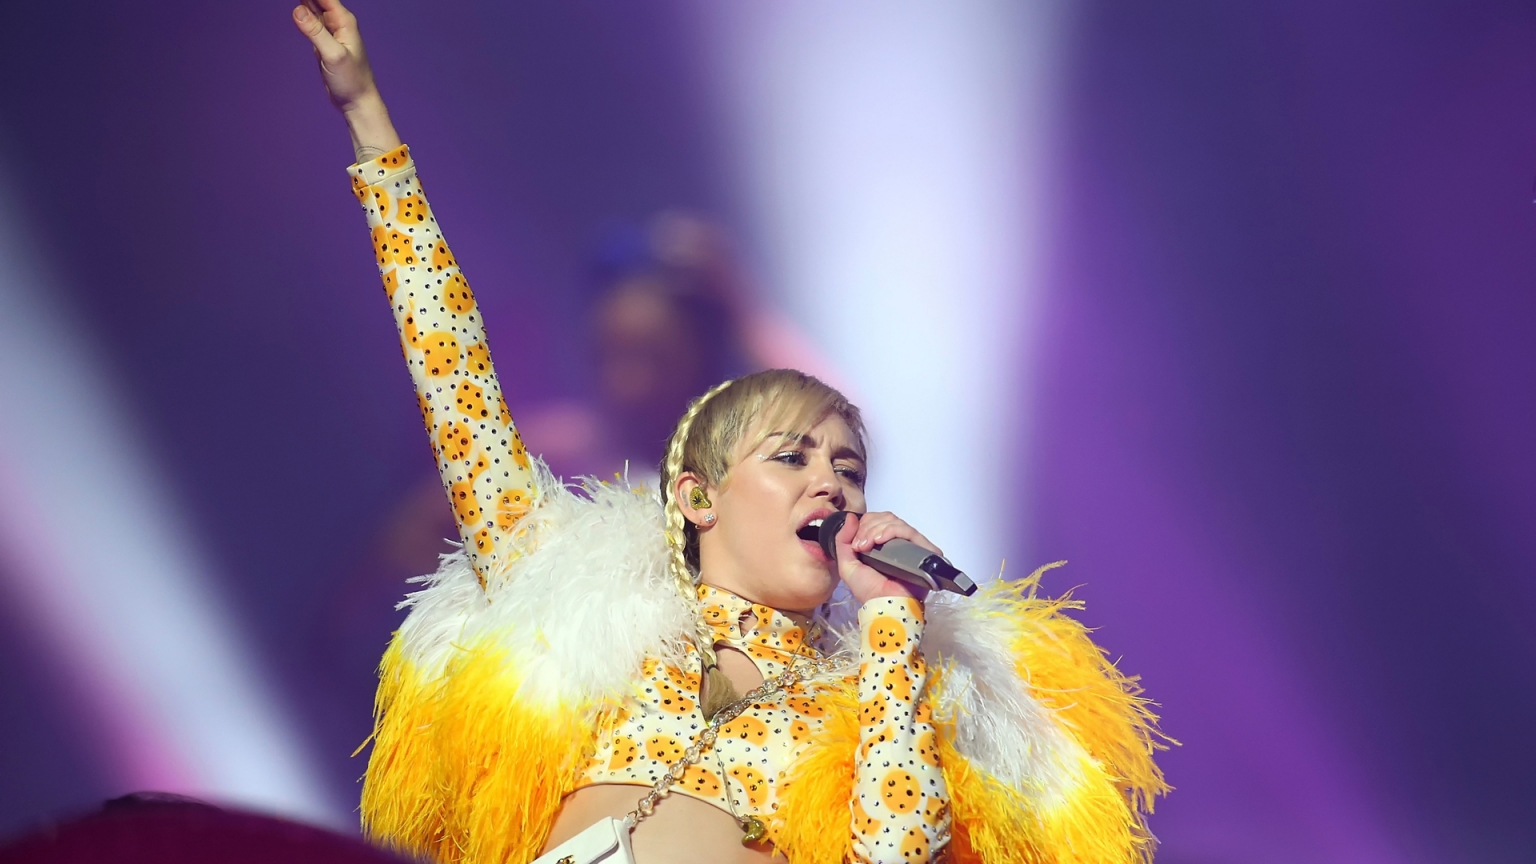 Miley Cyrus Live Performance for 1536 x 864 HDTV resolution